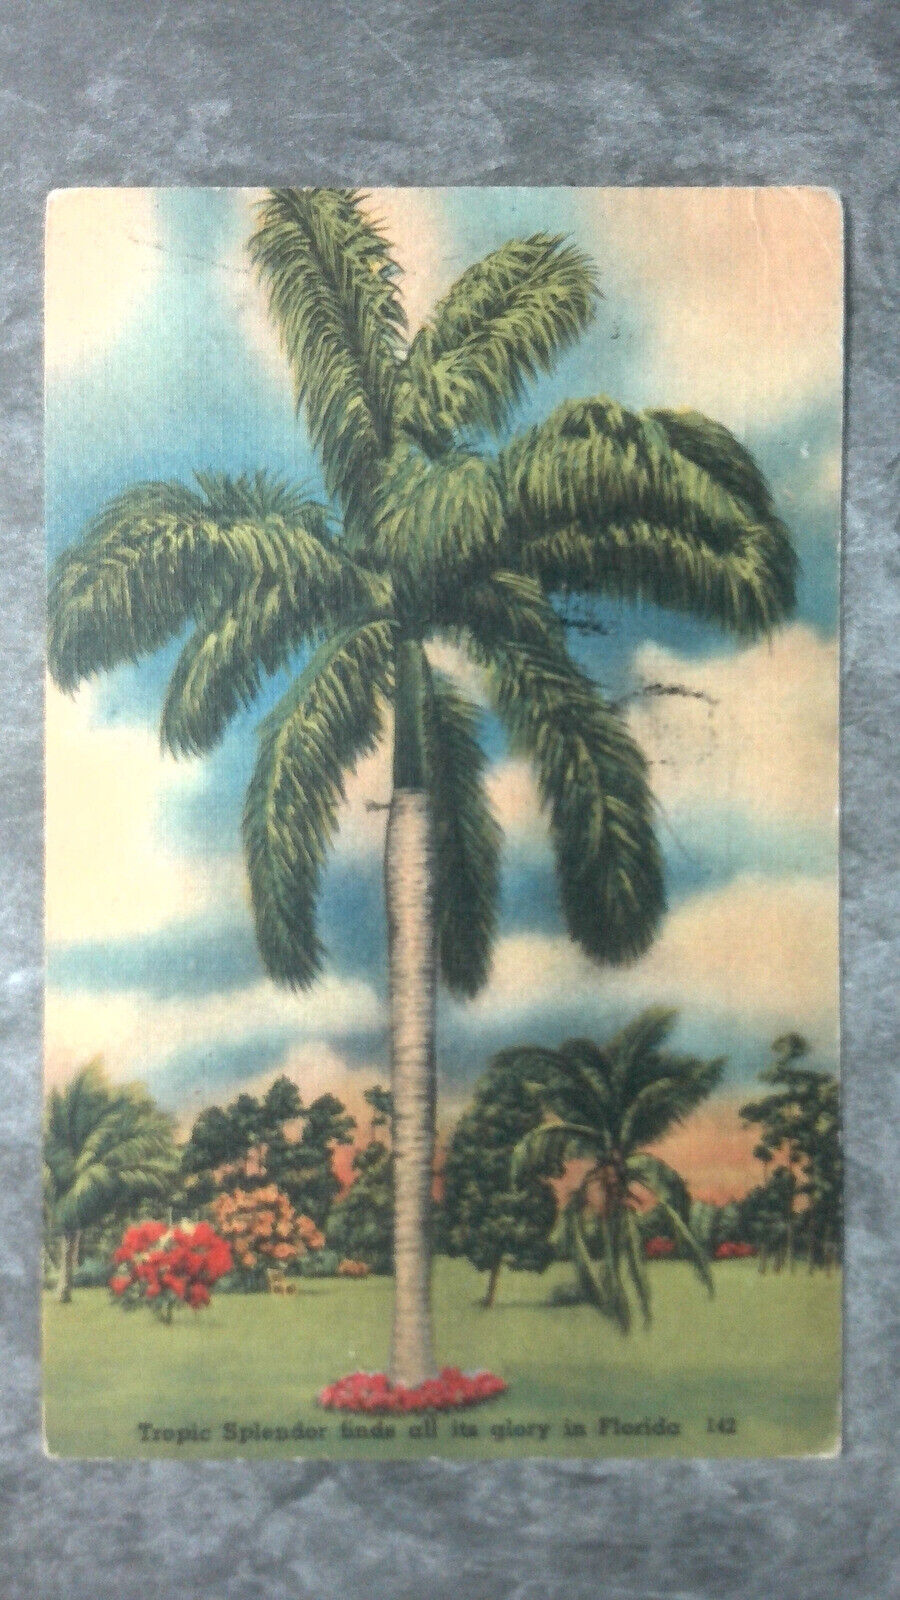 Vintage c1940s Postcard Palm Tree Tropic Splendor Finds All Its Glory in Florida